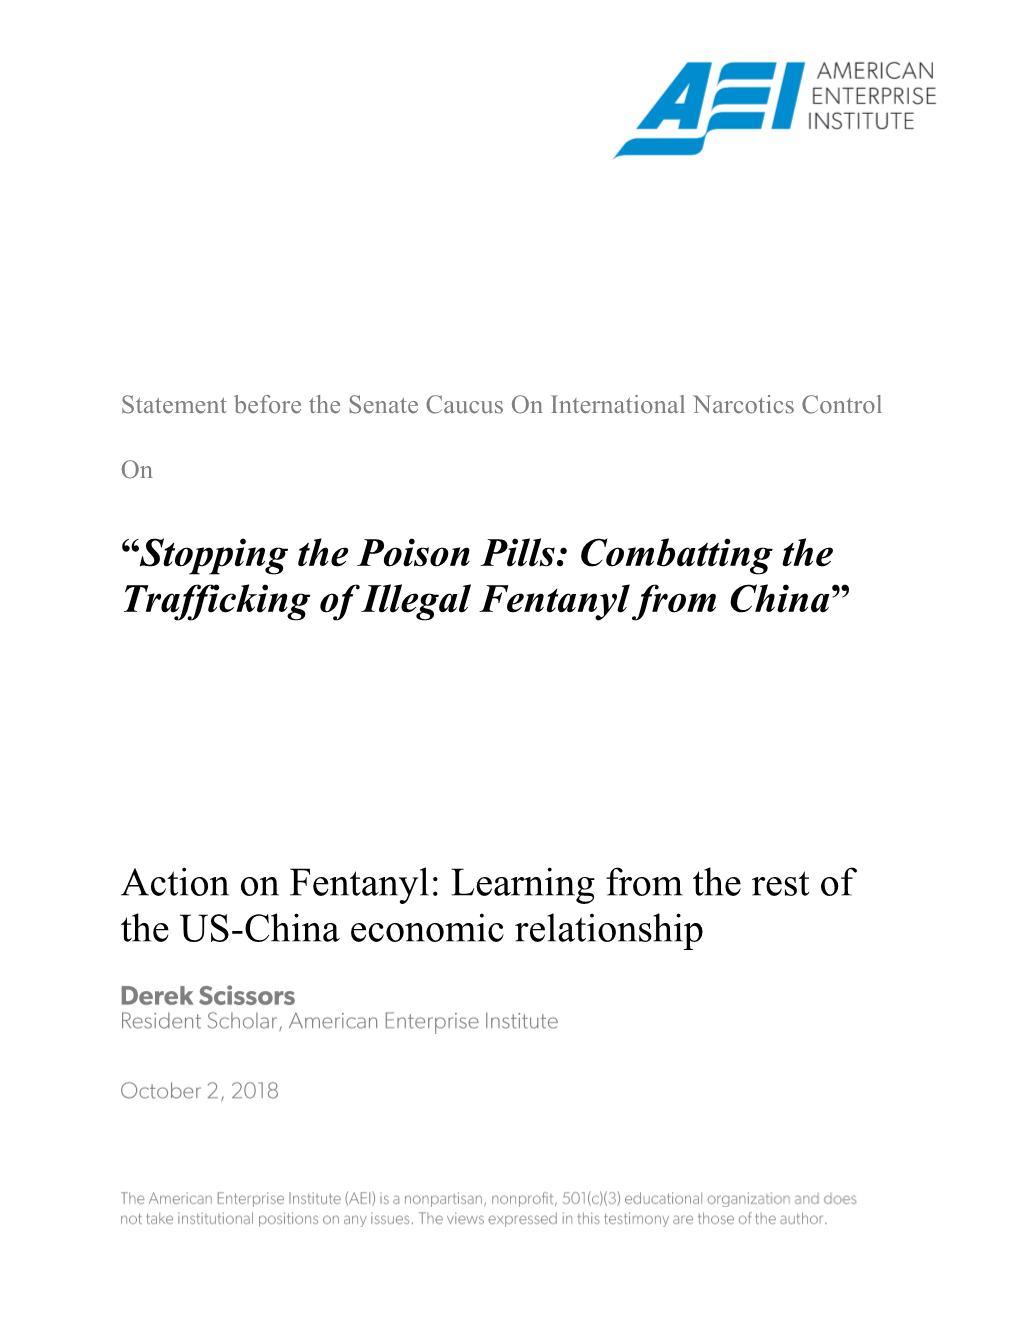 Stopping the Poison Pills: Combatting the Trafficking of Illegal Fentanyl from China”